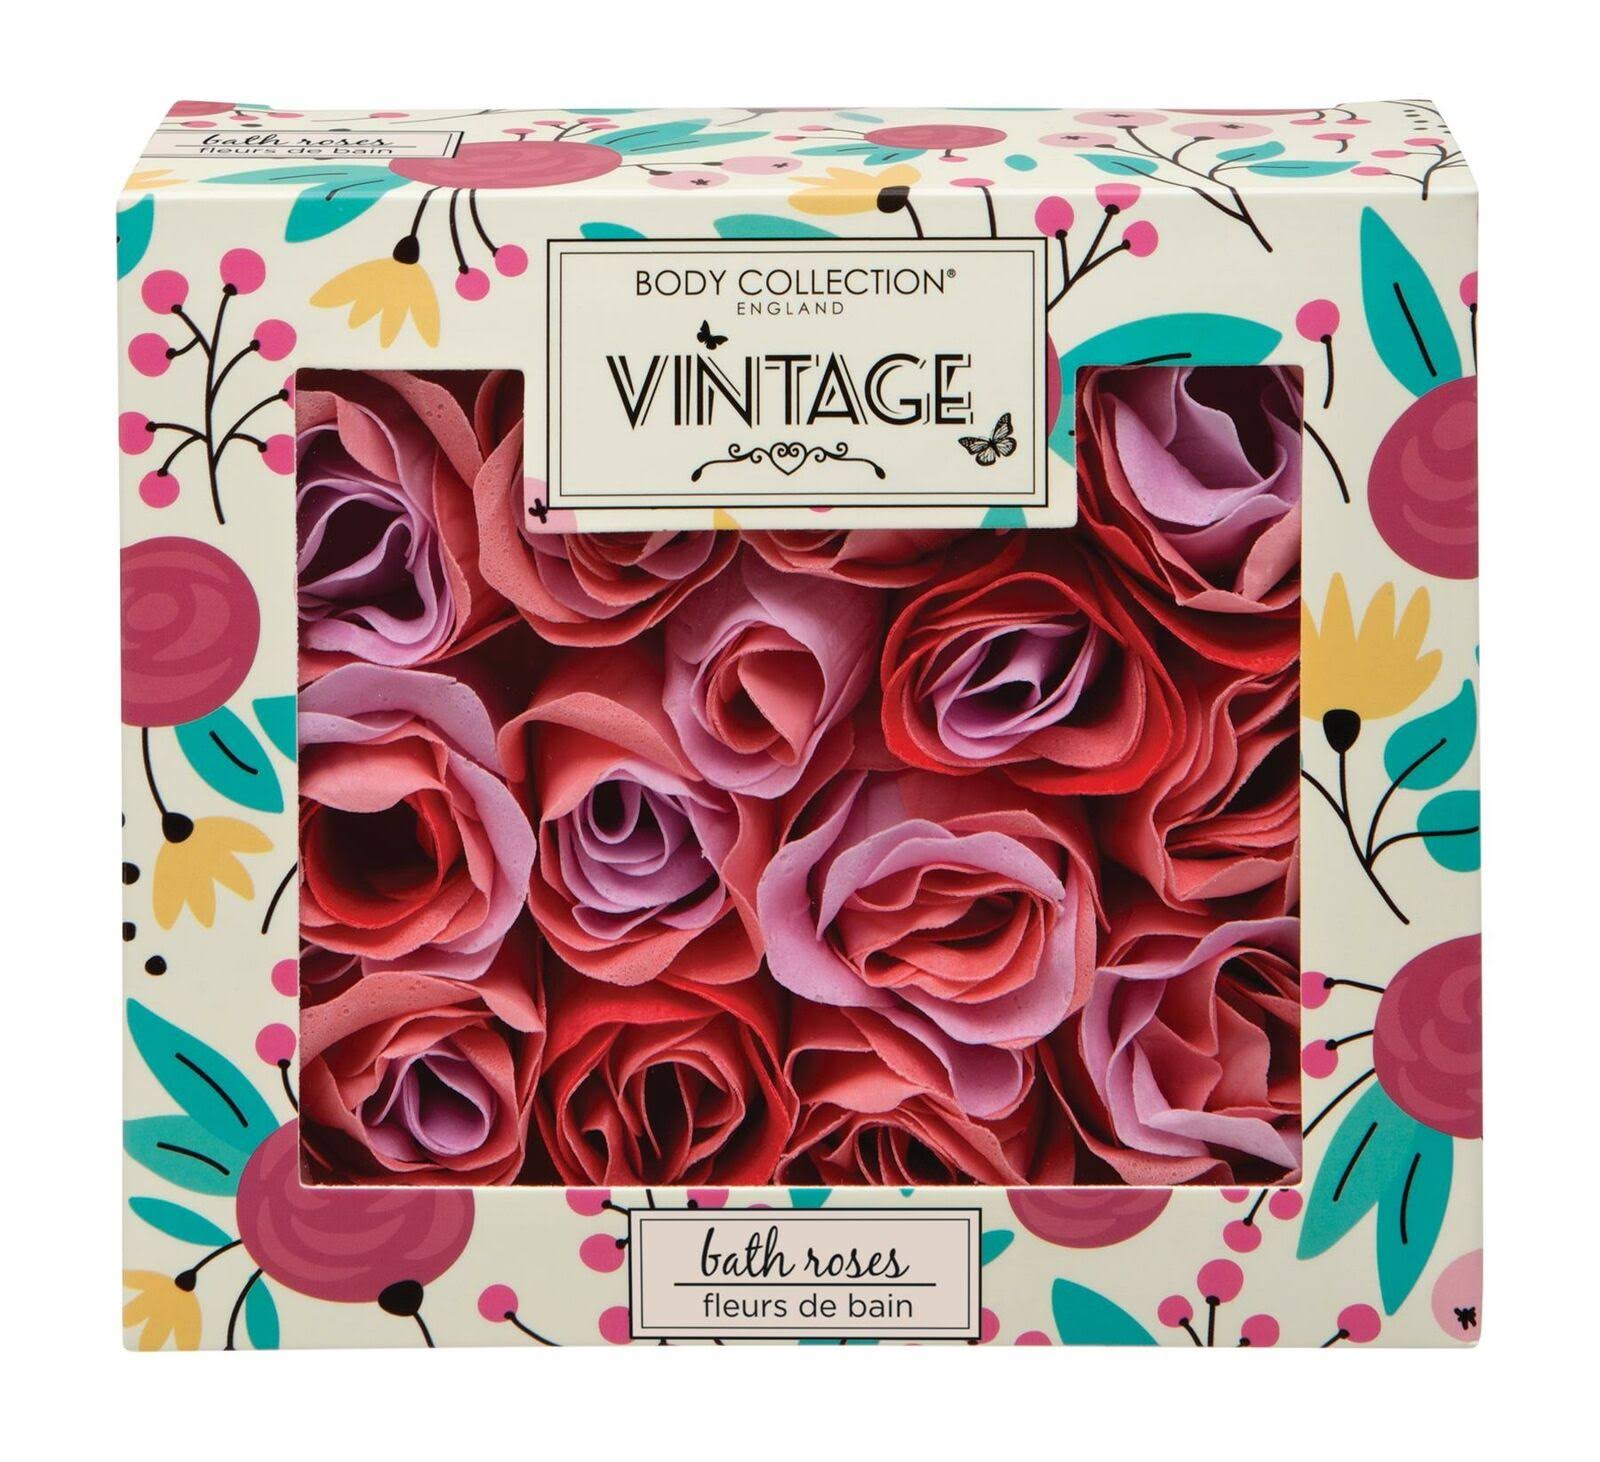 Body Collection Vintage Bath Roses